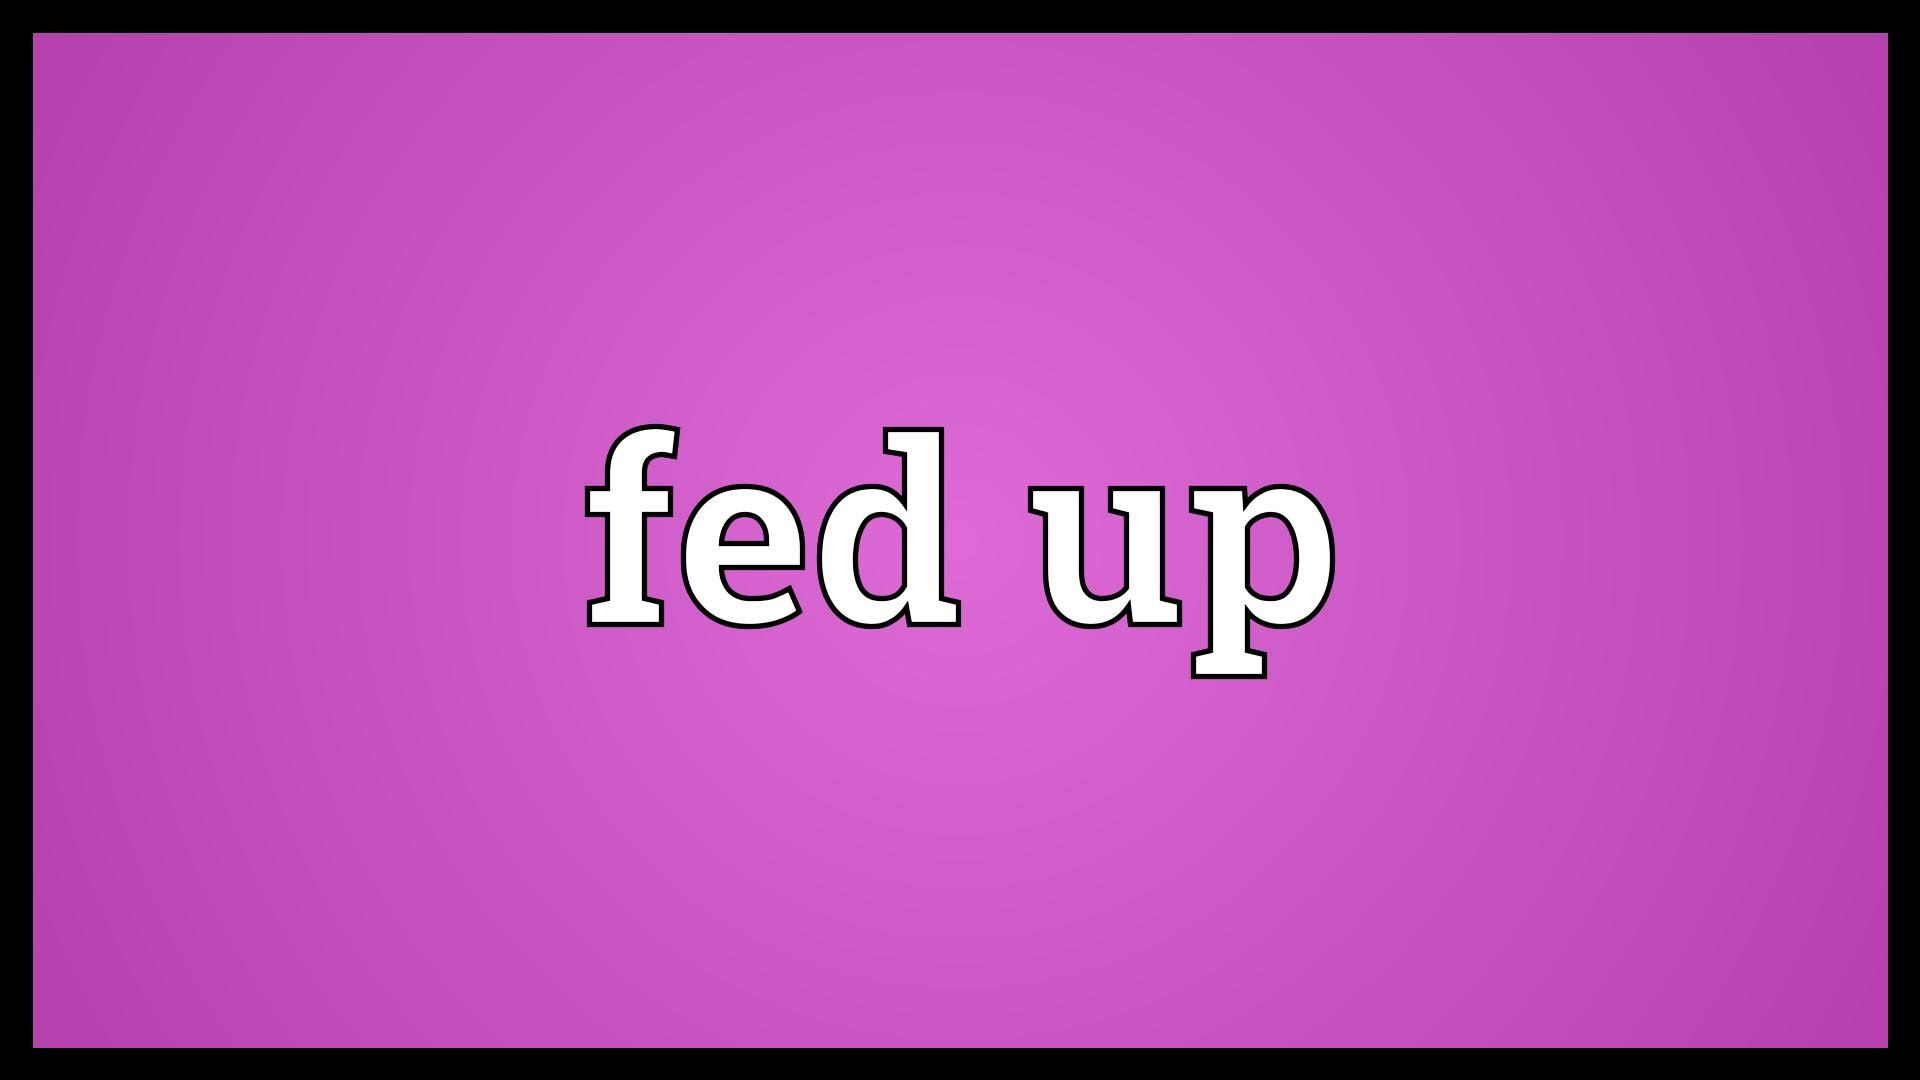 Fed up Meaning - YouTube